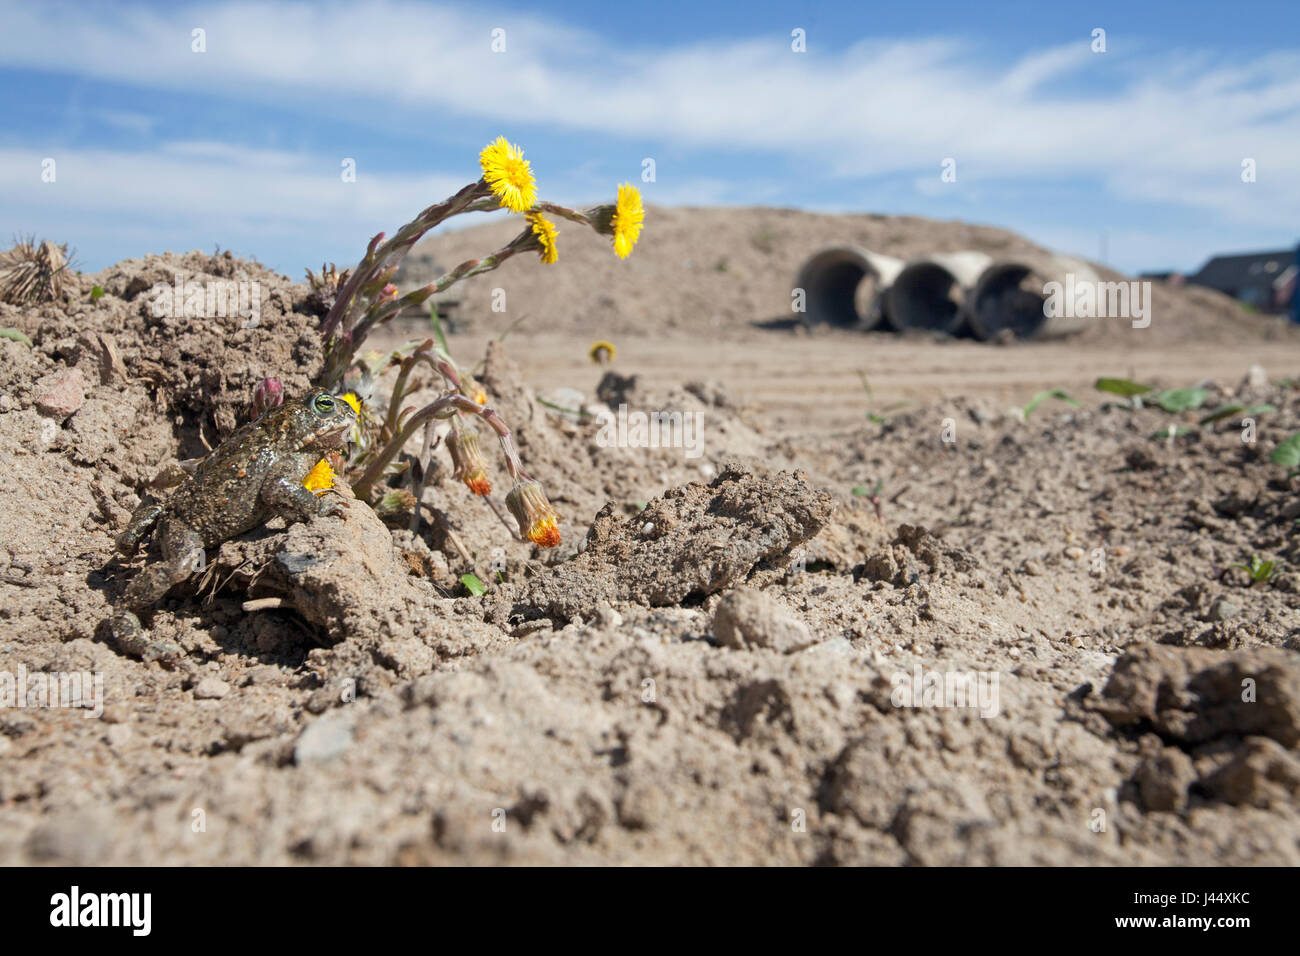 photo of a natterjack toad on a construction site with yellow flowers and sewage pipes in the background Stock Photo